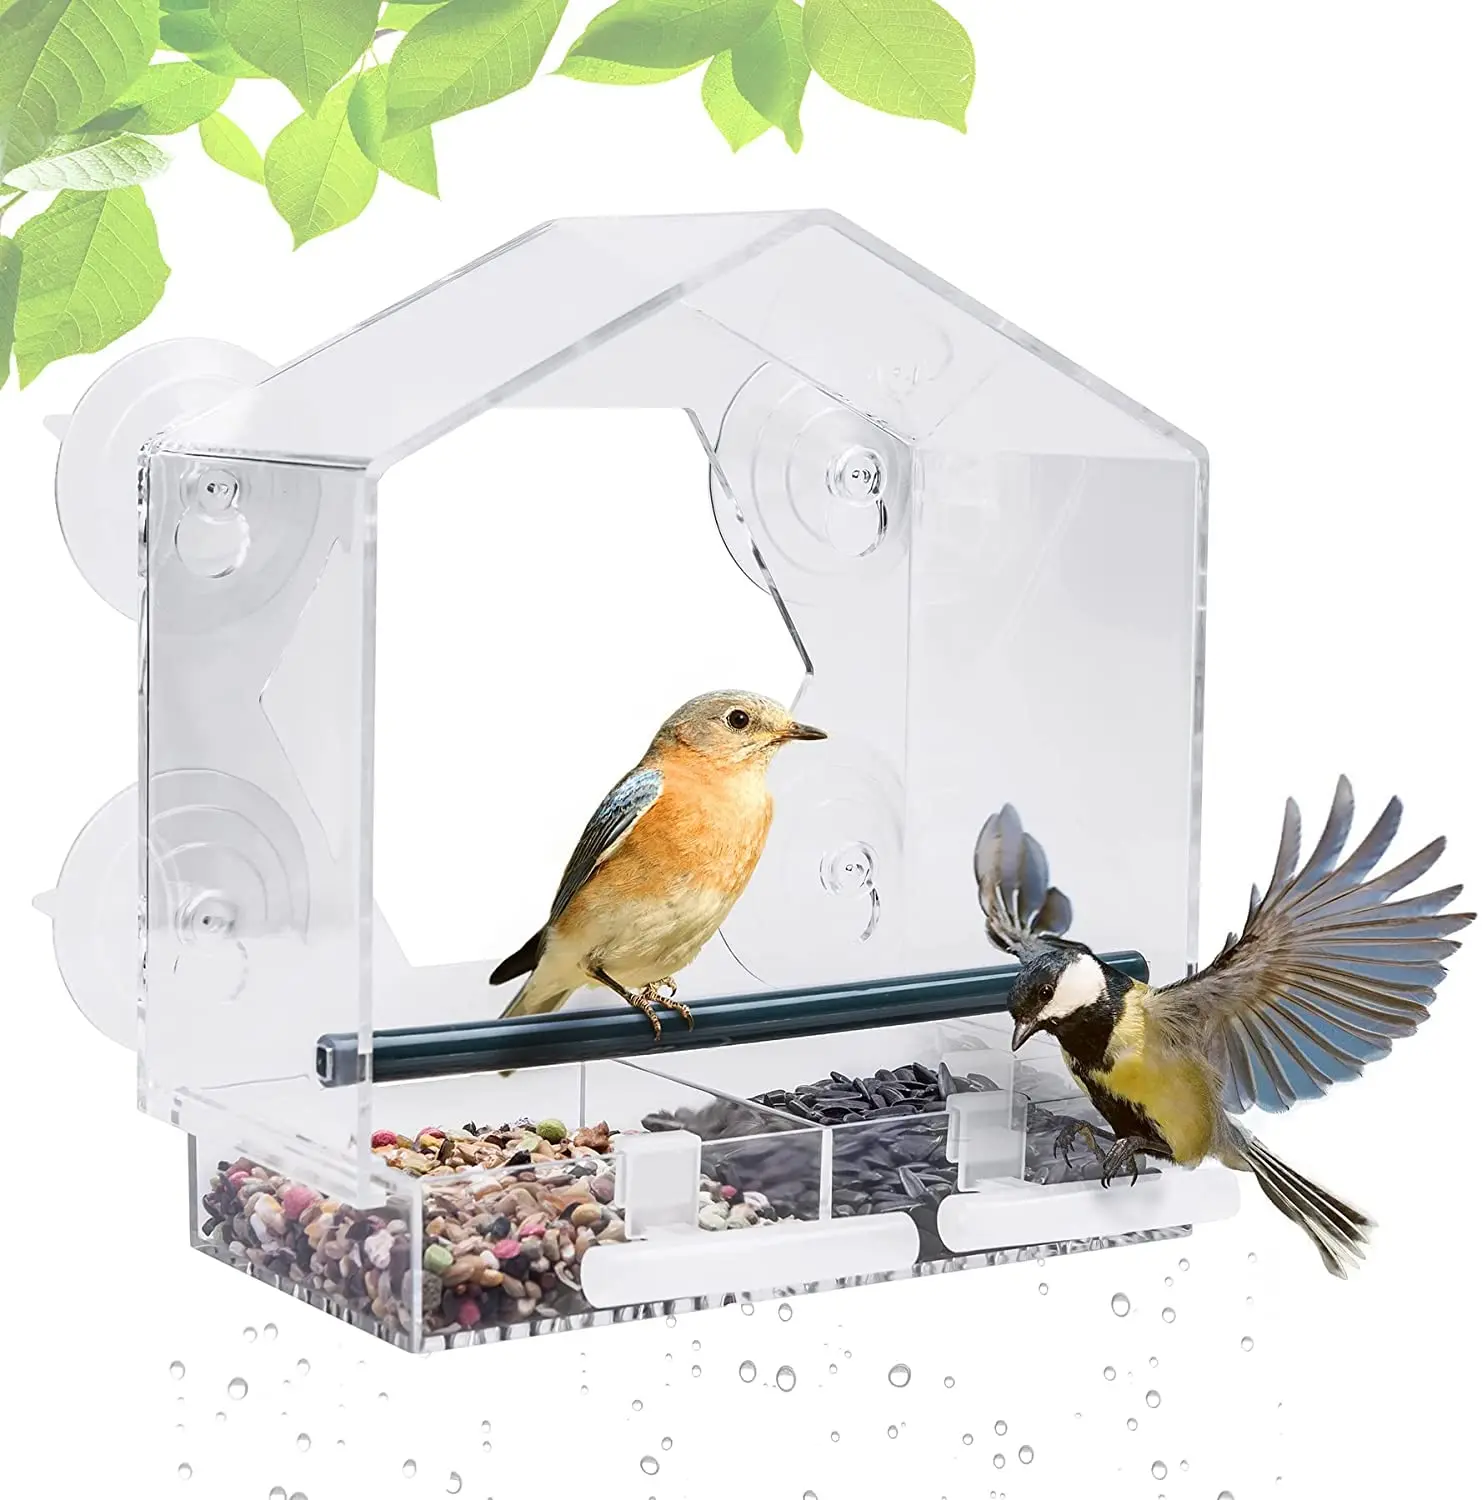 

Wholesale Acrylic Window Bird Feeder with 4 Super Strong Suction Cups & Sliding Seed Tray, Large, Clear Acrylic, Easy Clean